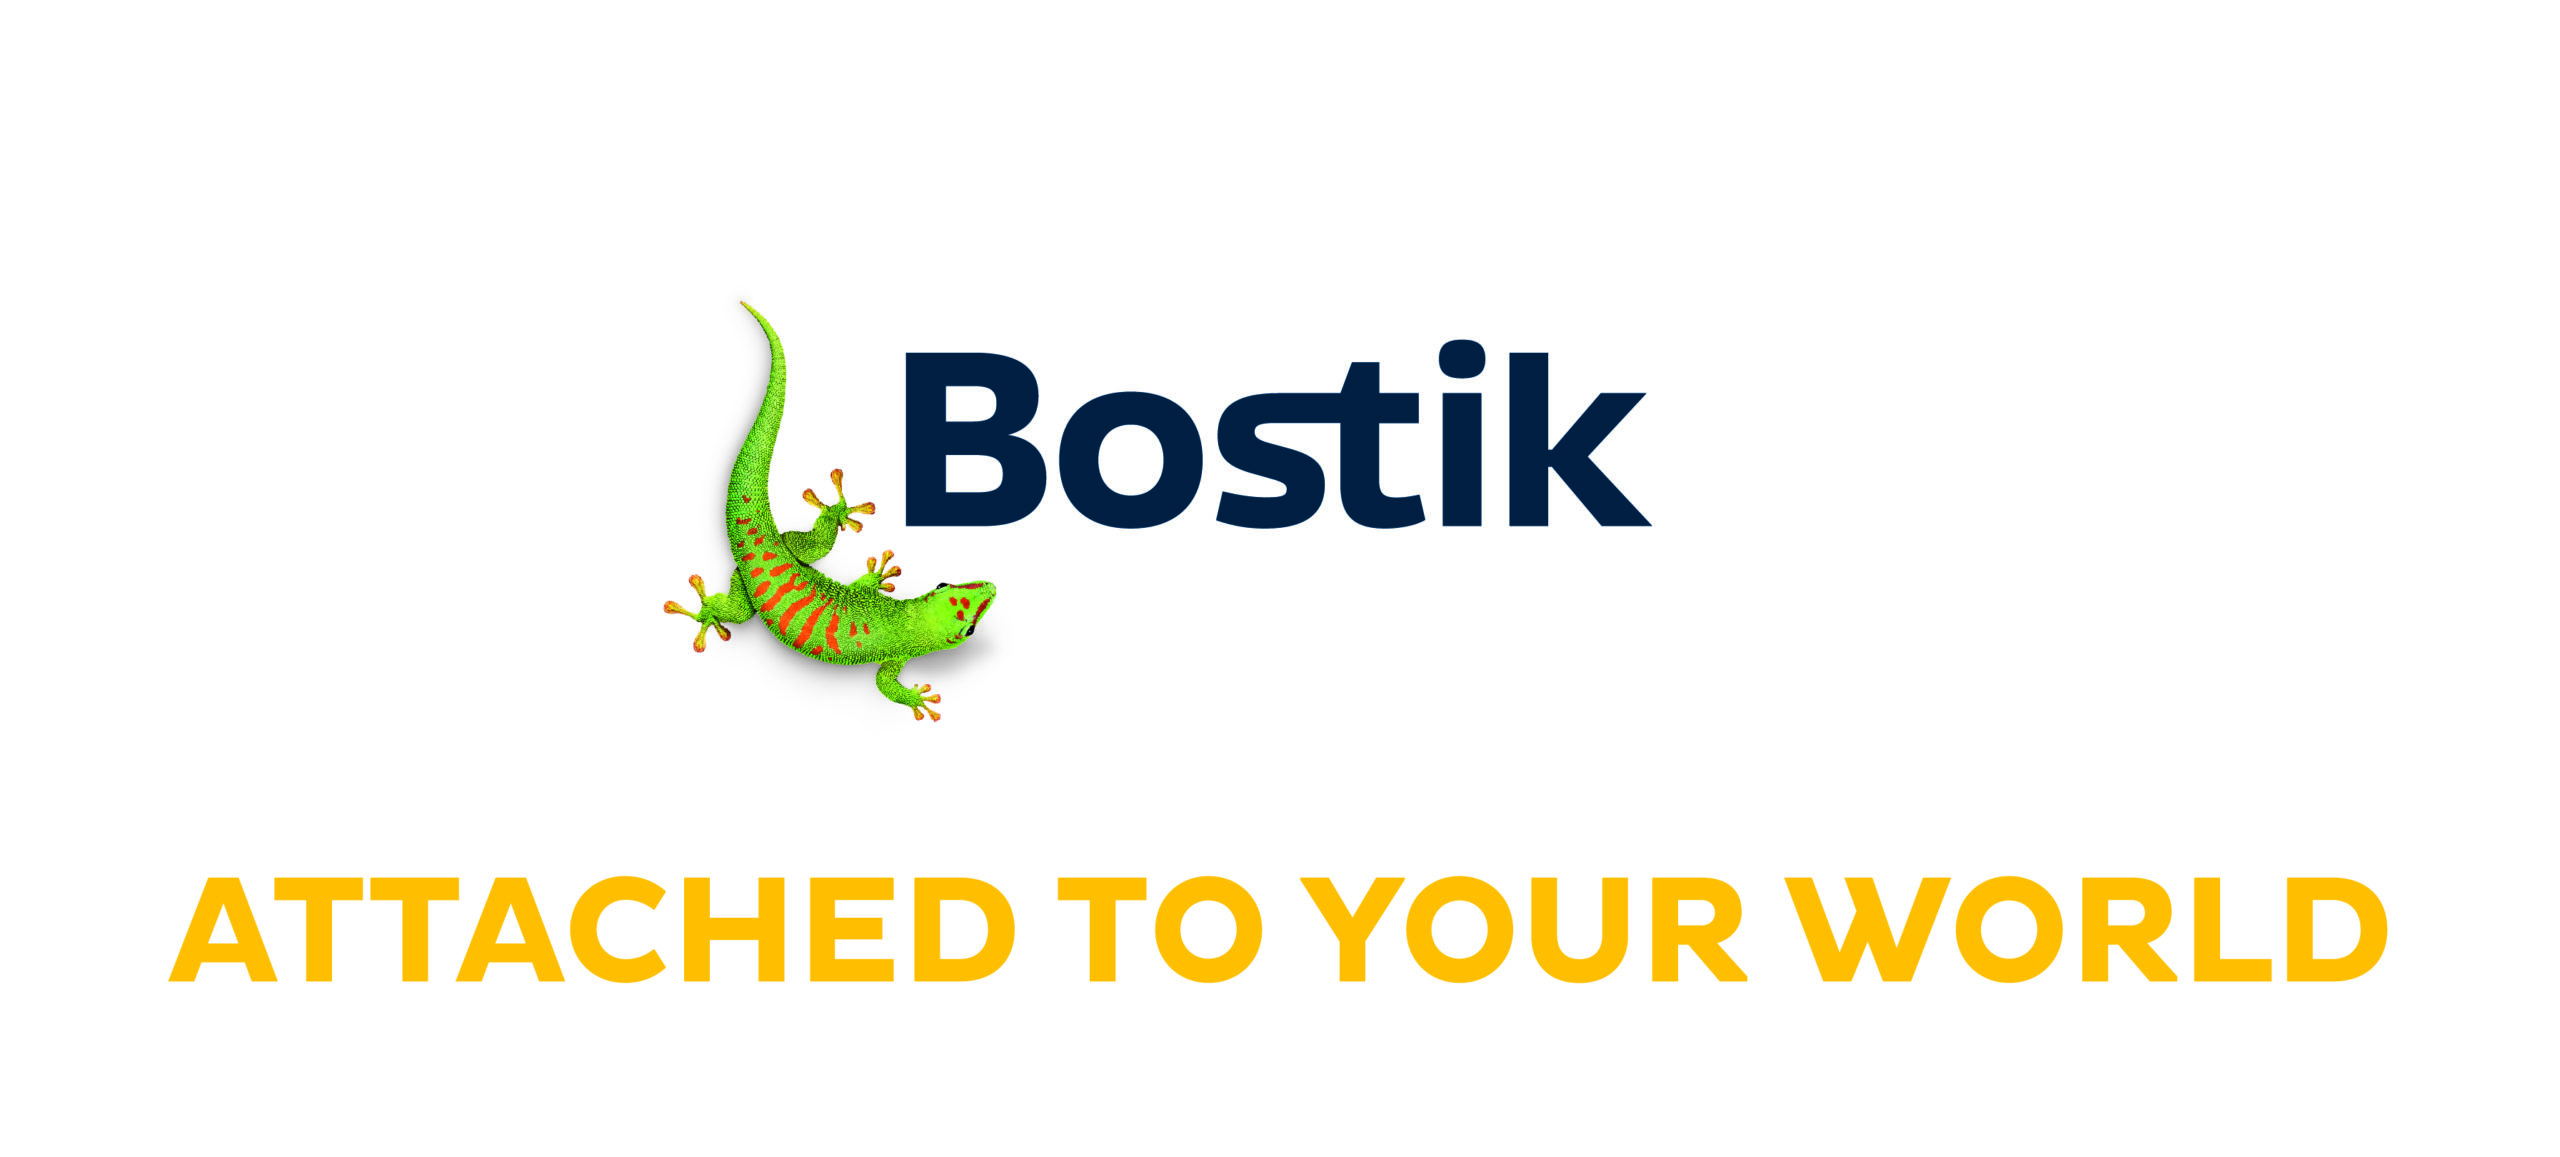 Bostik attached to your world